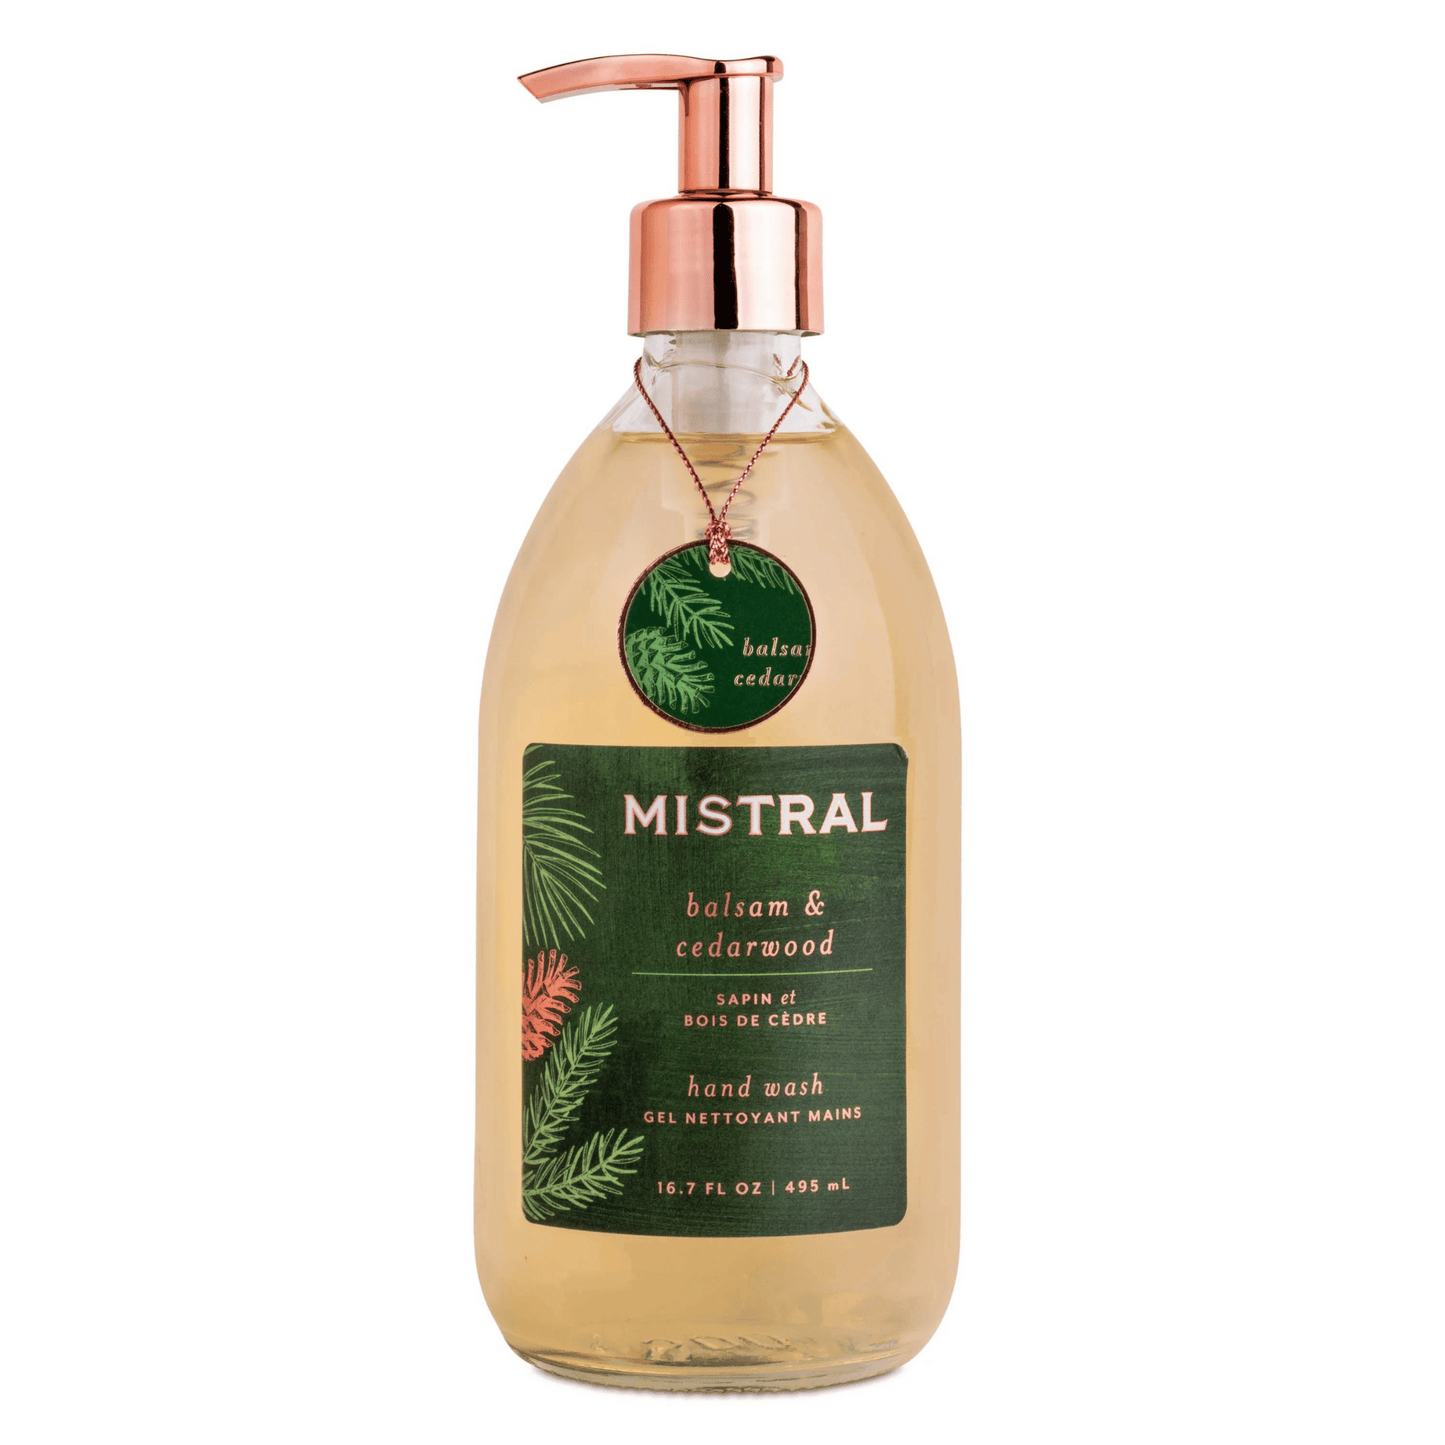 Primary Image of Balsam and Cedarwood Hand Wash